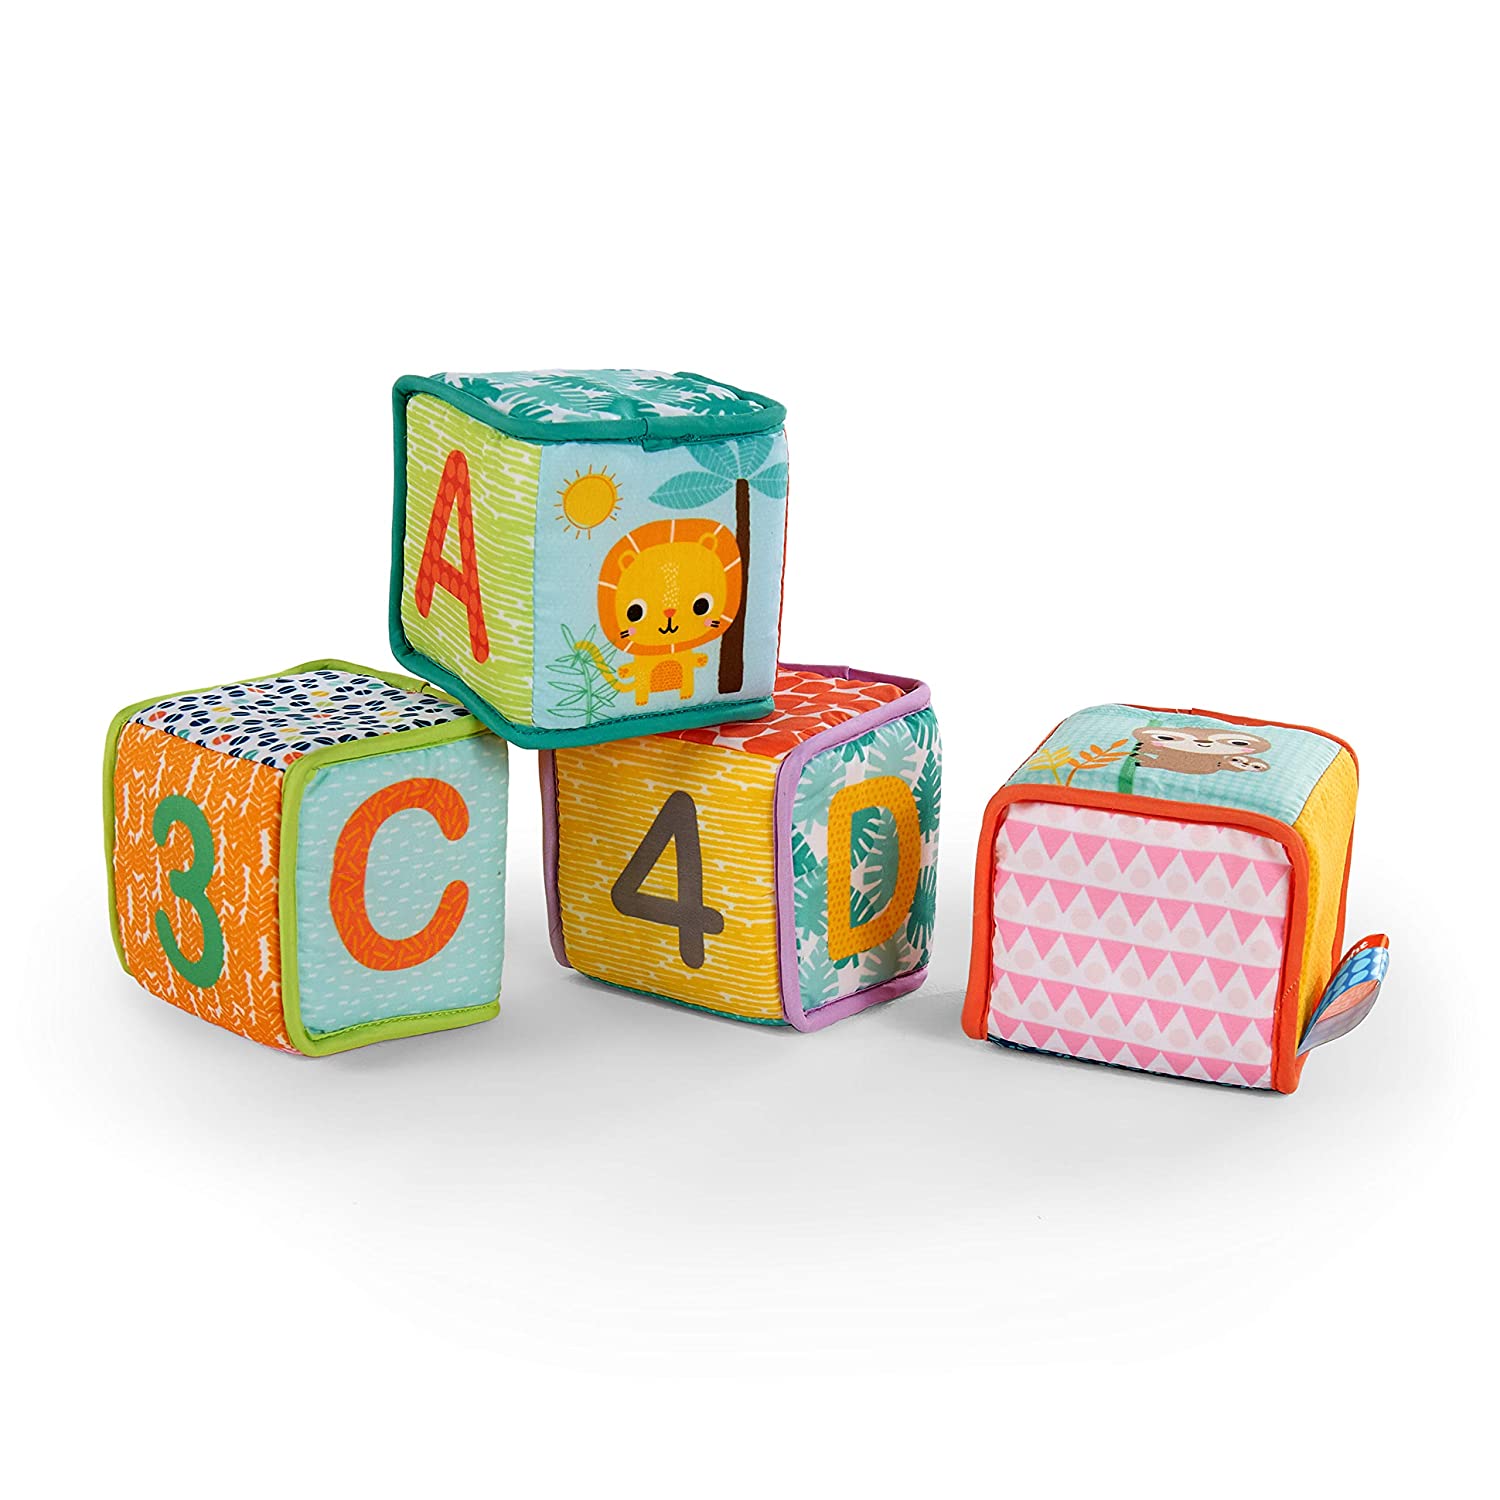 7 Best Baby Blocks 2023 - Buying Guide & Reviews 4